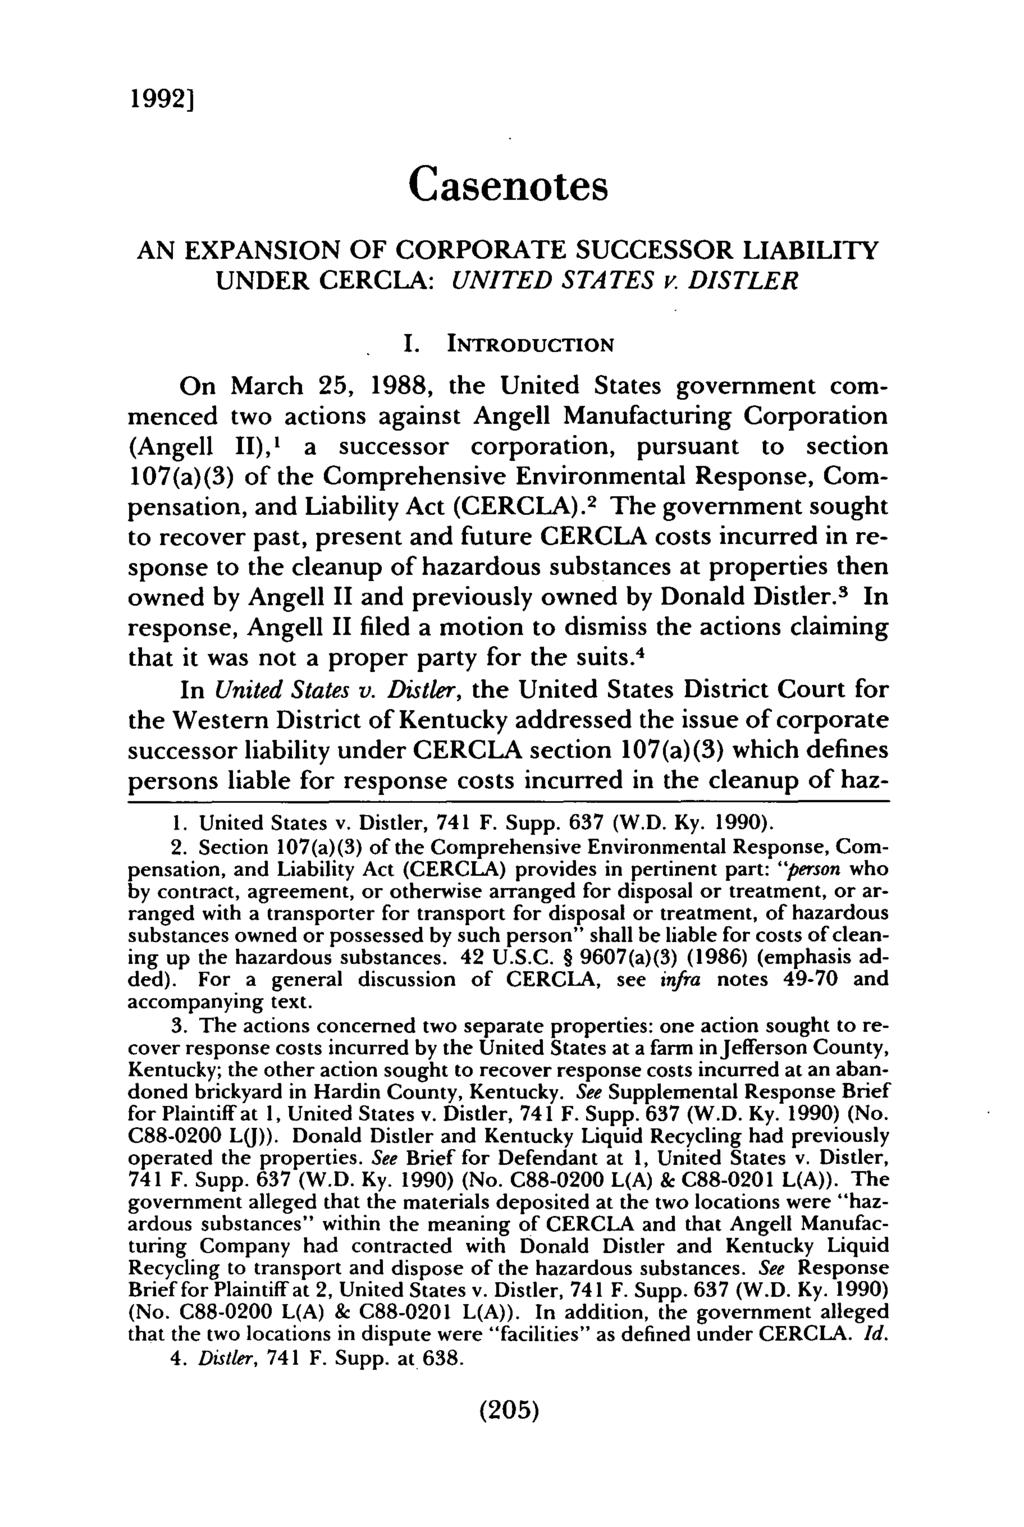 19921 Girard: An Expansion of Corporate Successor Liability Under CERCLA: Unite Casenotes AN EXPANSION OF CORPORATE SUCCESSOR LIABILITY UNDER CERCLA: UNITED STATES v DISTLER I.